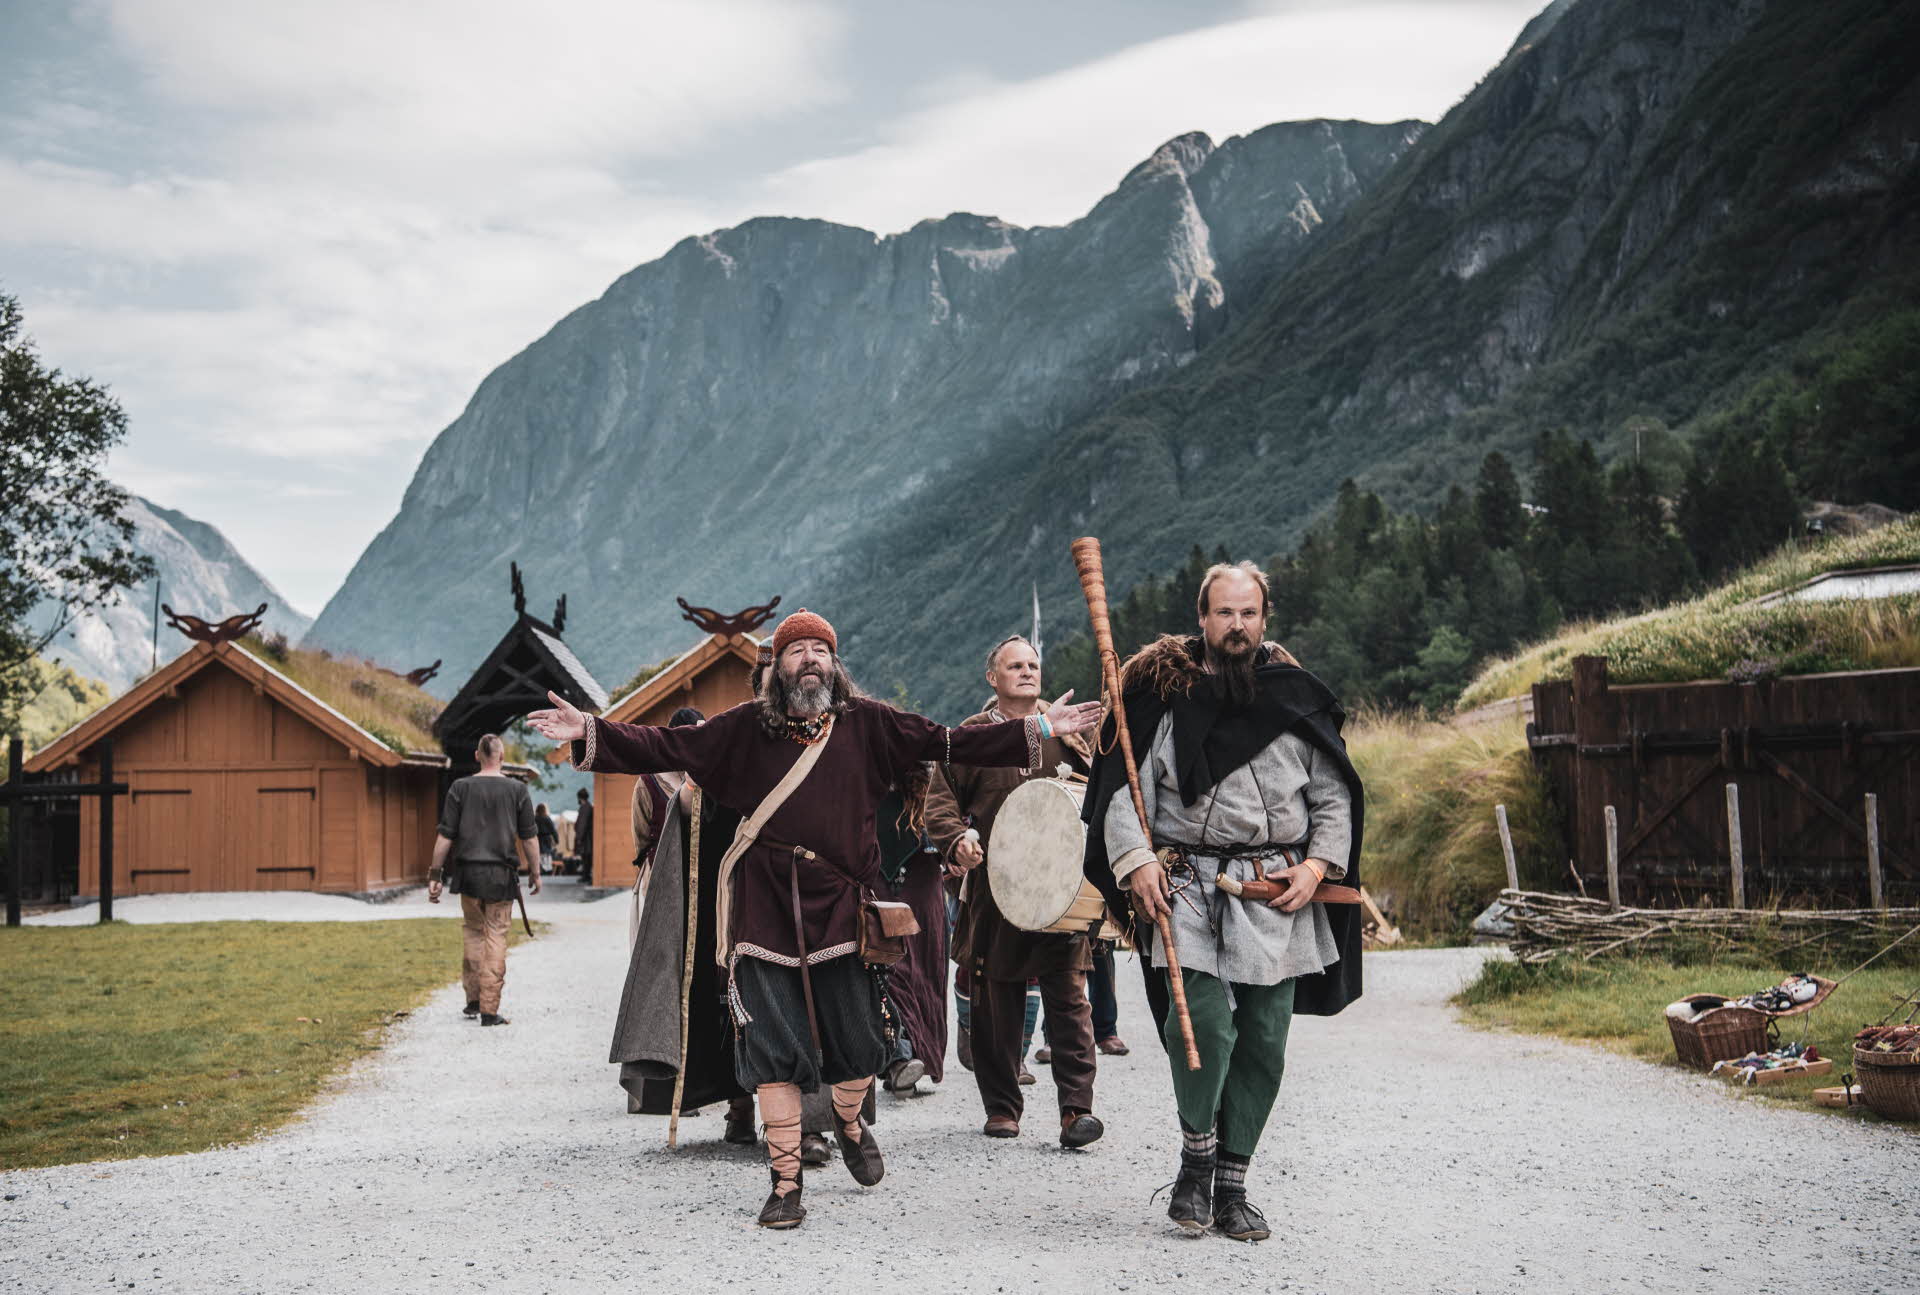 A group of male Vikings walking into the Viking Valley carrying instruments and other accessories. Tall mountains in the background.